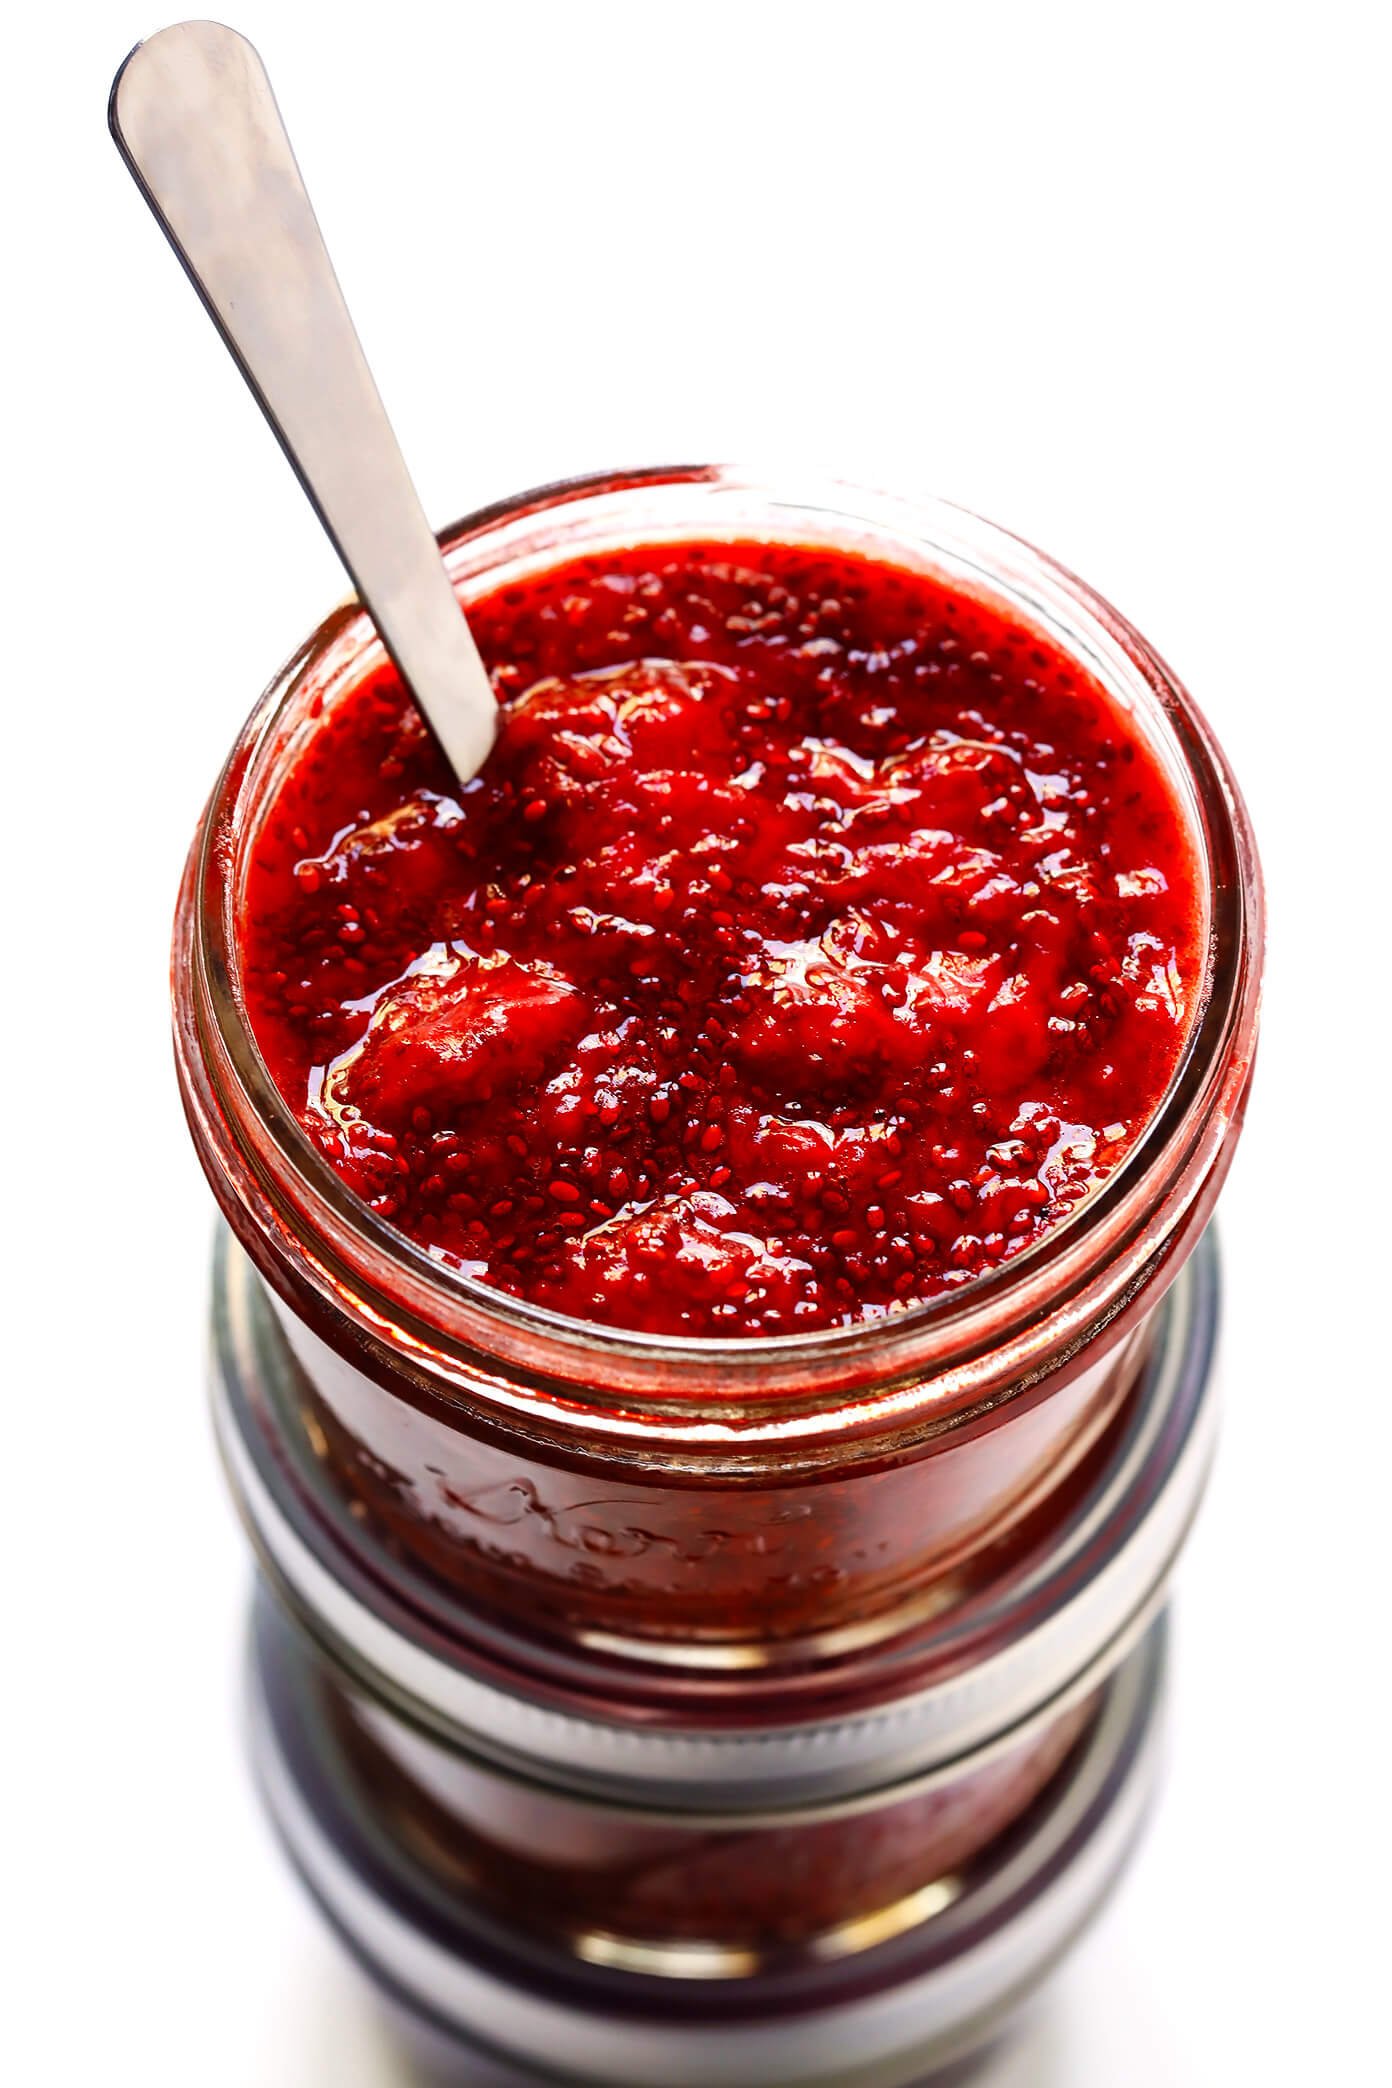 This 10-Minute Chia Seed Jam recipe is super easy to make, it's made with just 1 tablespoon of honey (instead of tons of added sugars!), it's perfect for breakfasts (toast, parfaits, etc.), sandwiches, cookies, and more, and it's SO delicious! Feel free to make it with your favorite juicy fruit (such as strawberry, blackberry, raspberry, peach, etc.). | Gimme Some Oven #chiajam #cleaneating #chiaseed #healthybreakfast